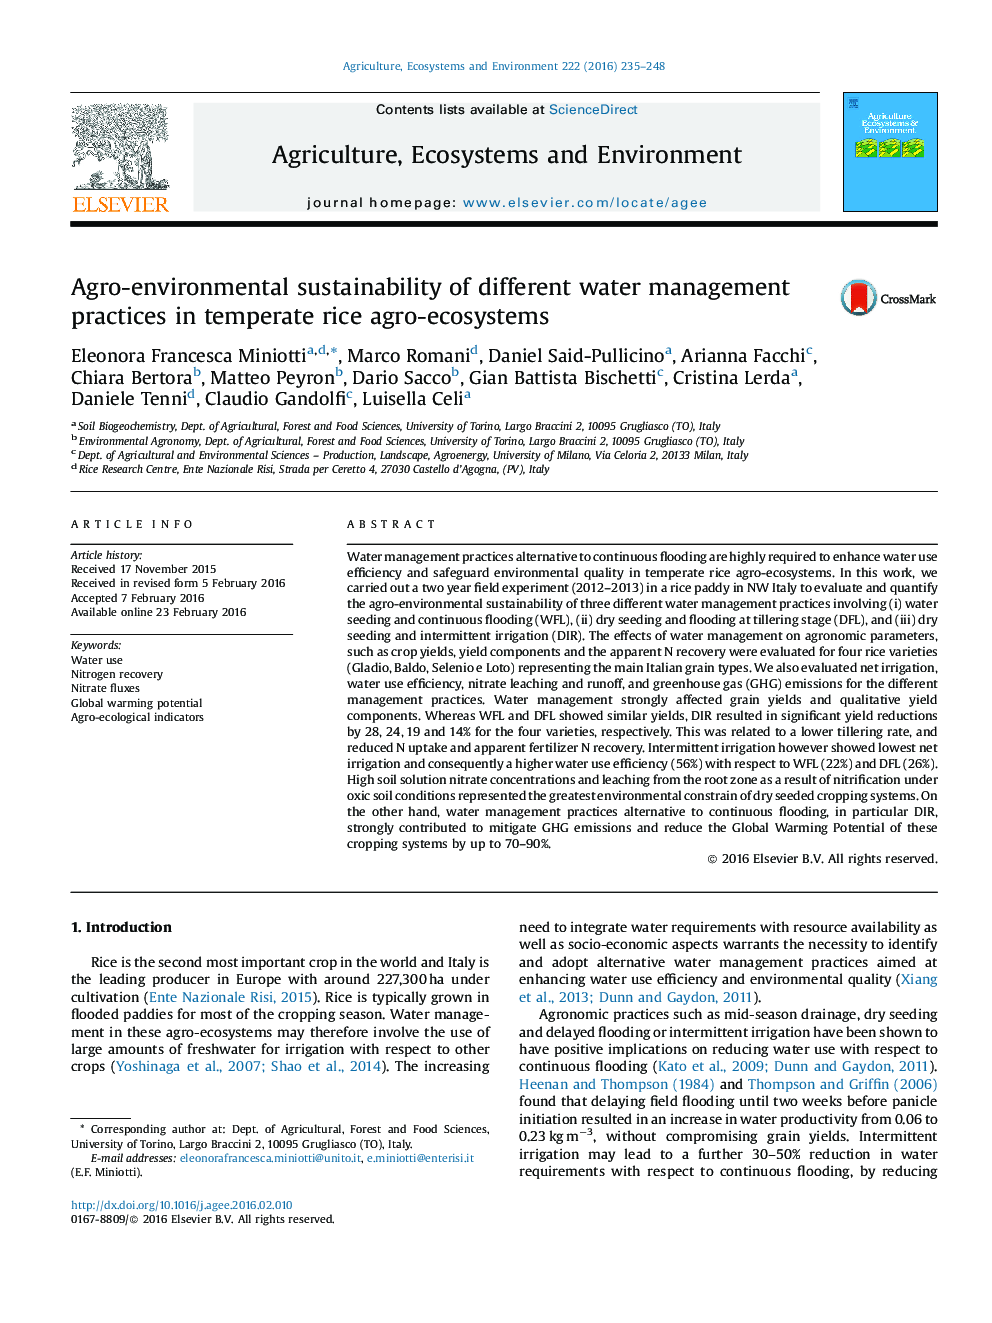 Agro-environmental sustainability of different water management practices in temperate rice agro-ecosystems